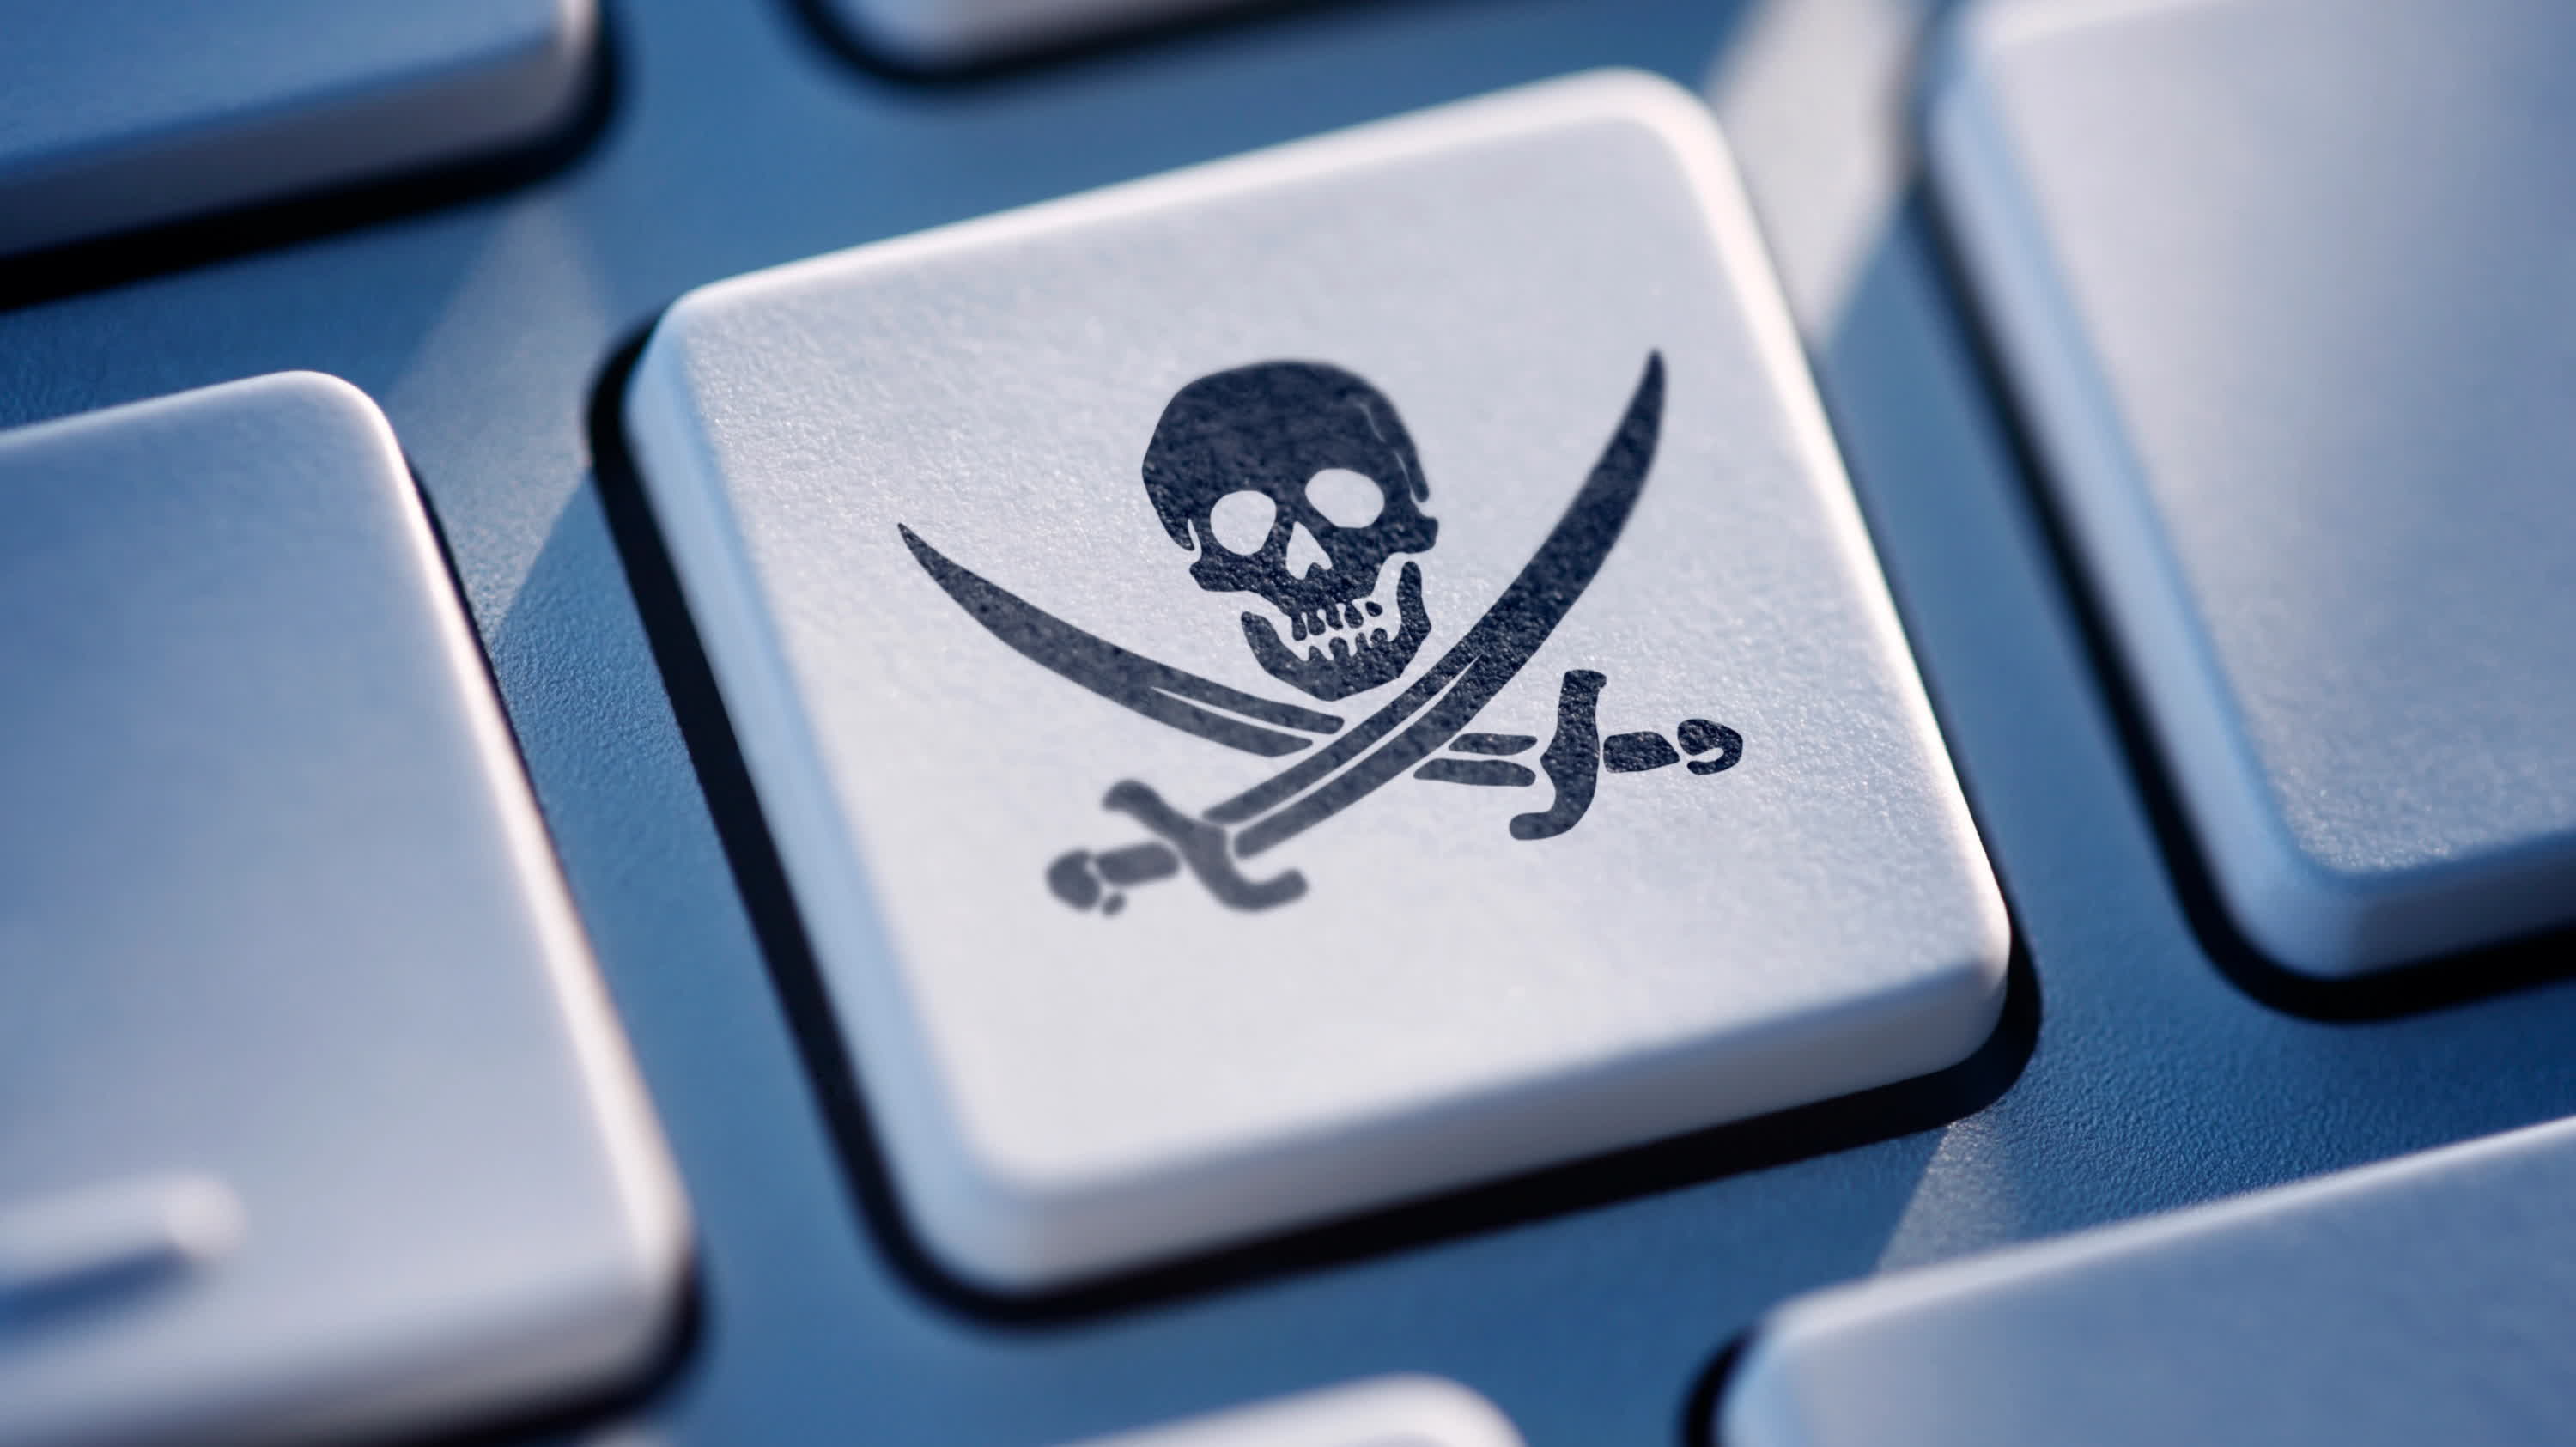 Italy's new anti-piracy law could bring swift justice to IPTV streamers and users